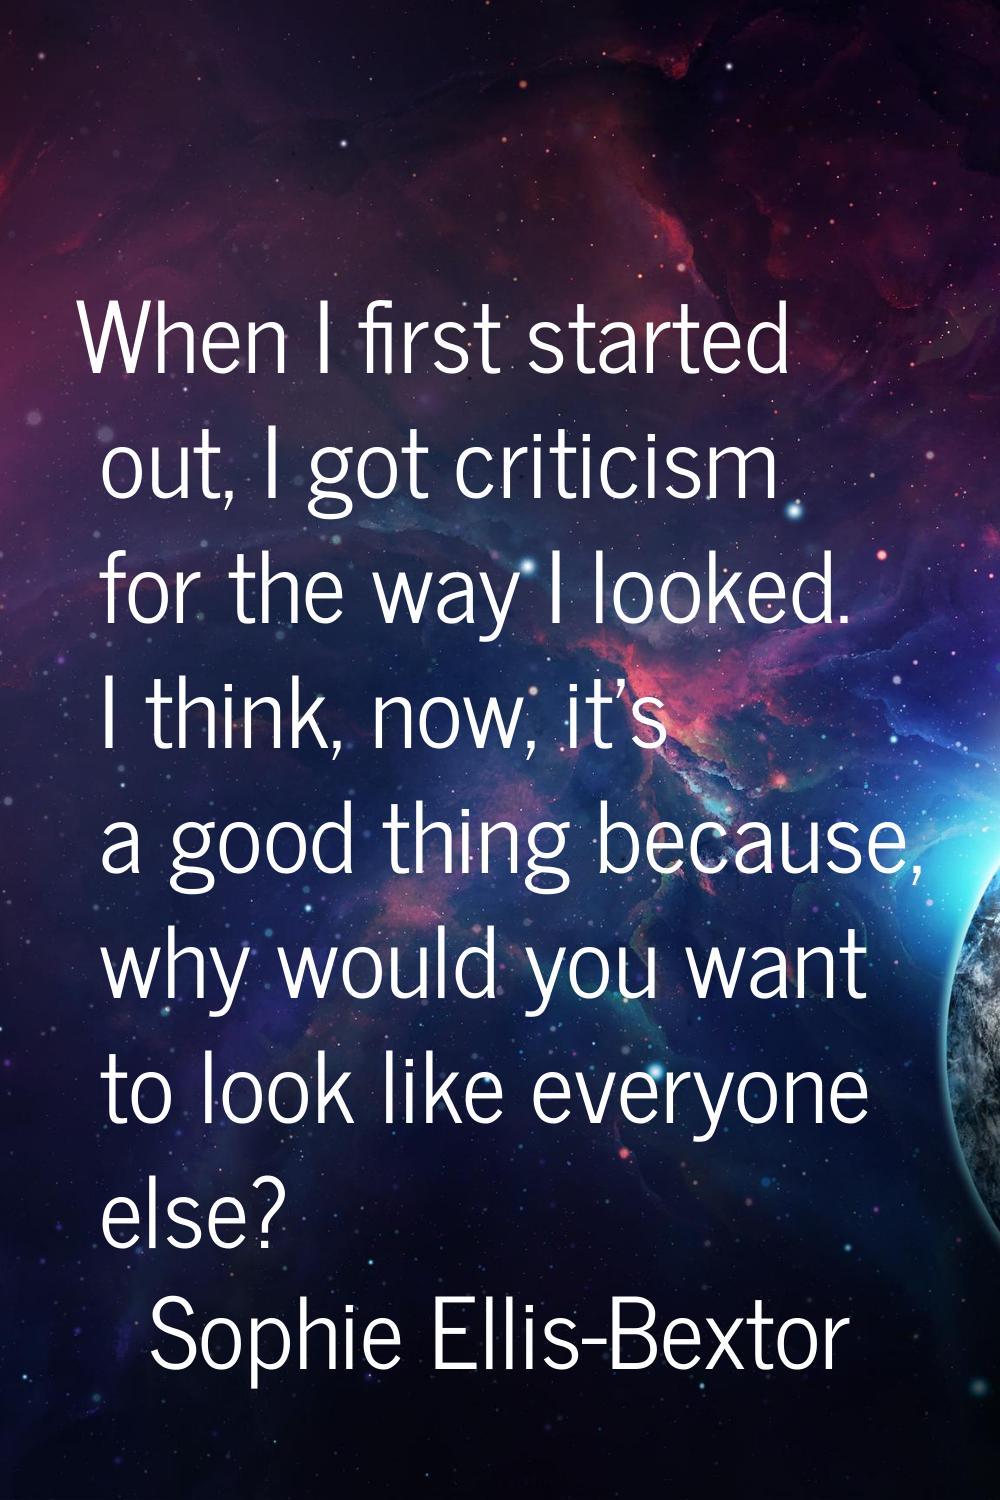 When I first started out, I got criticism for the way I looked. I think, now, it's a good thing bec